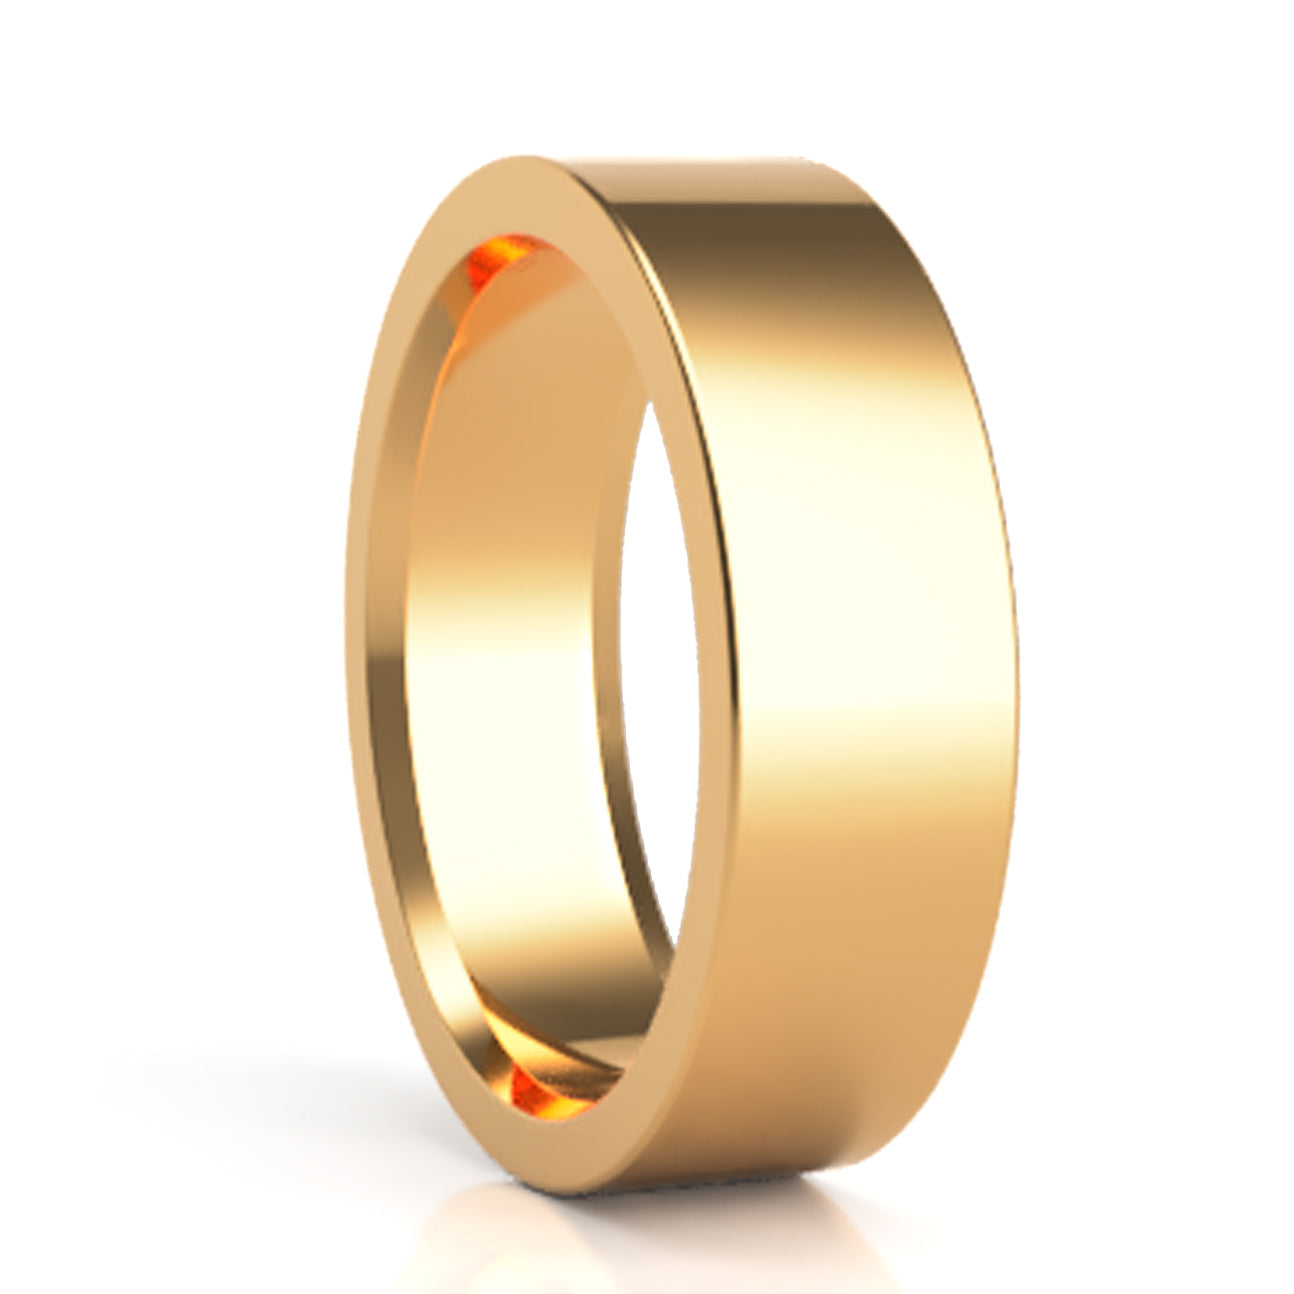 A 10k yellow gold classic style wedding band displayed on a neutral white background.